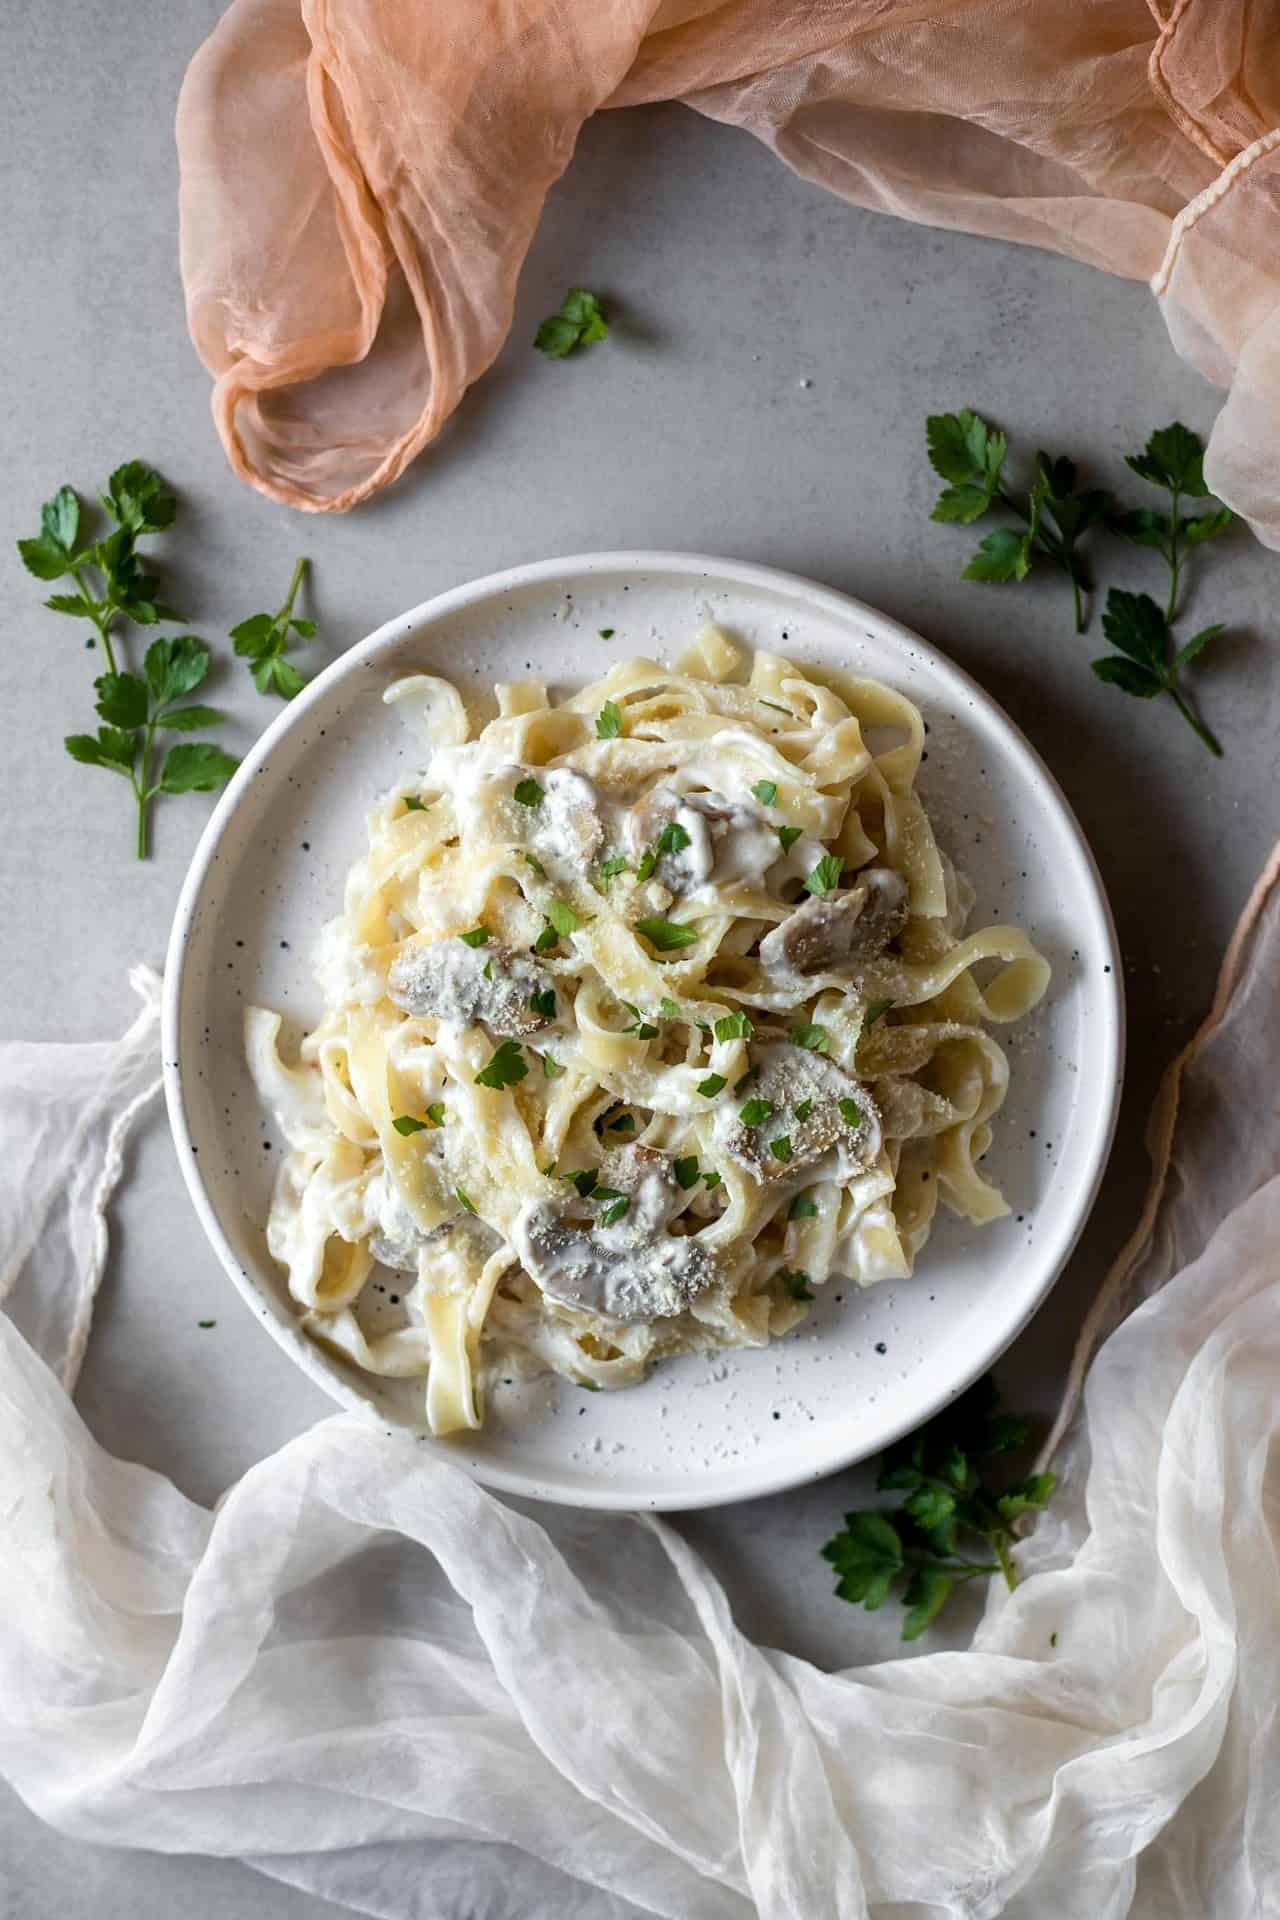 This Low FODMAP Mushroom Fettuccine is super creamy, flavorful and so delicious. Moreover is easy to digest and makes a filling lunch or dinner.